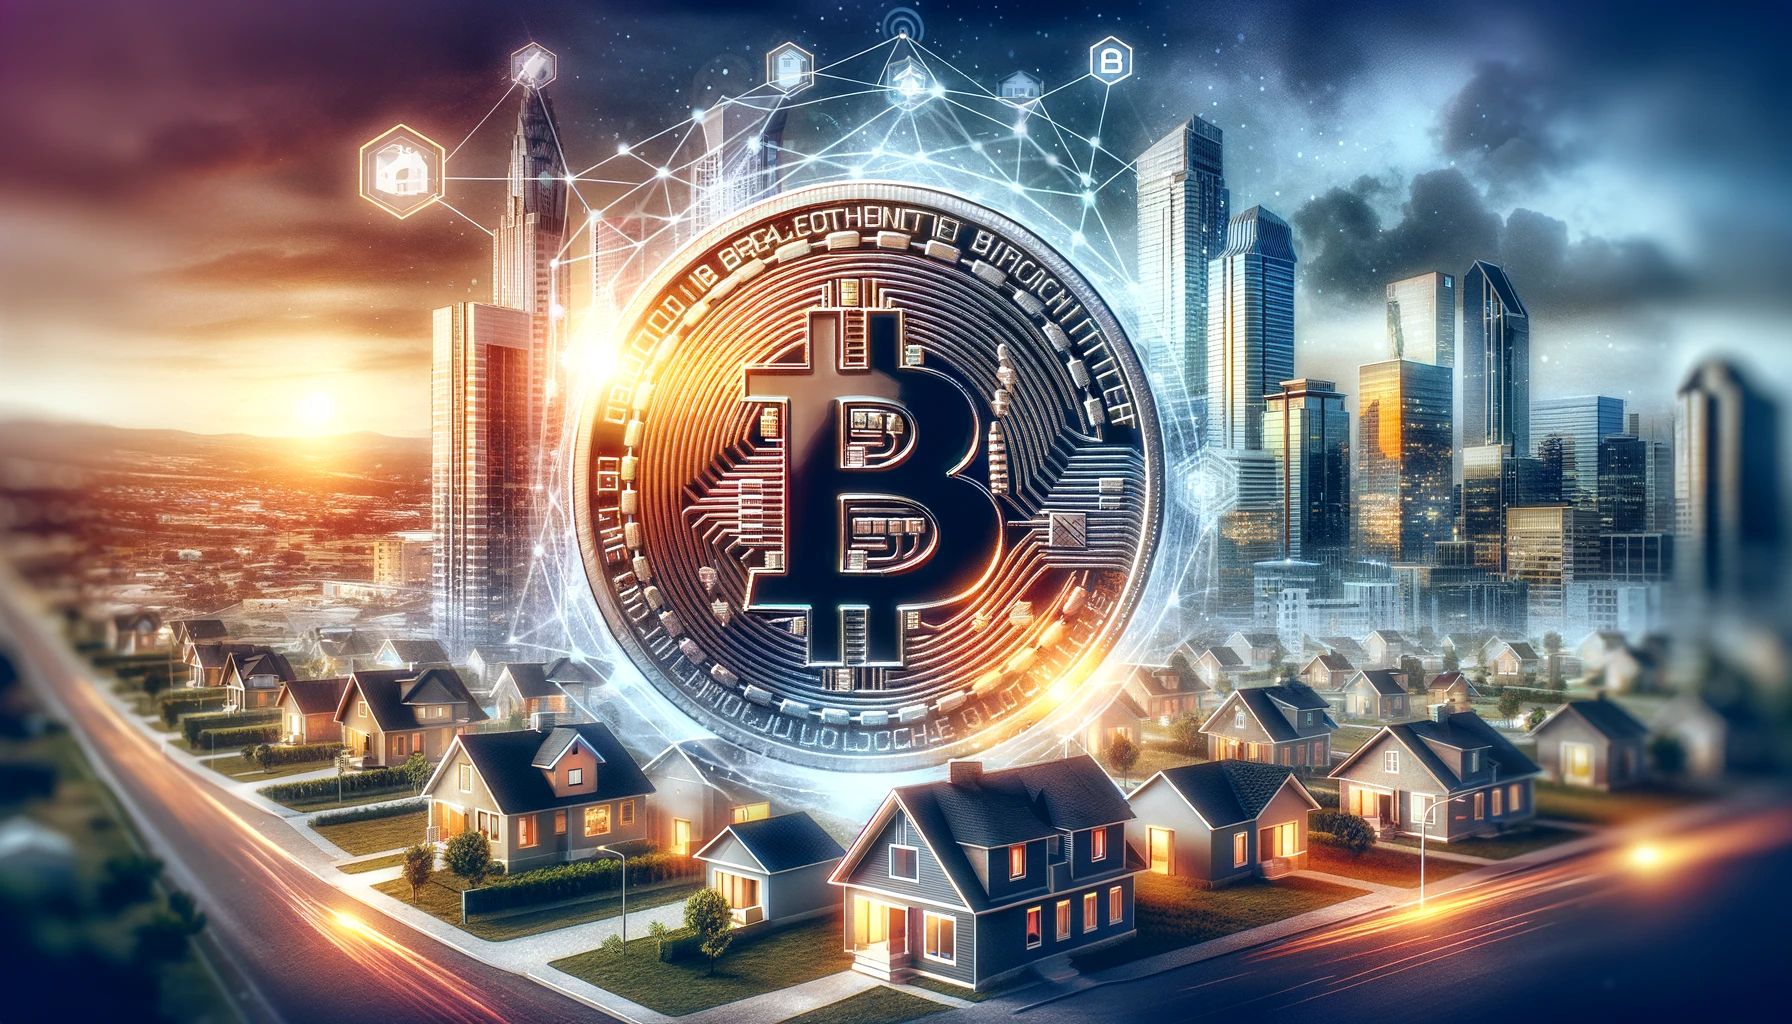 The blockchain and homes on a neighborhood block, connected by RealOpen